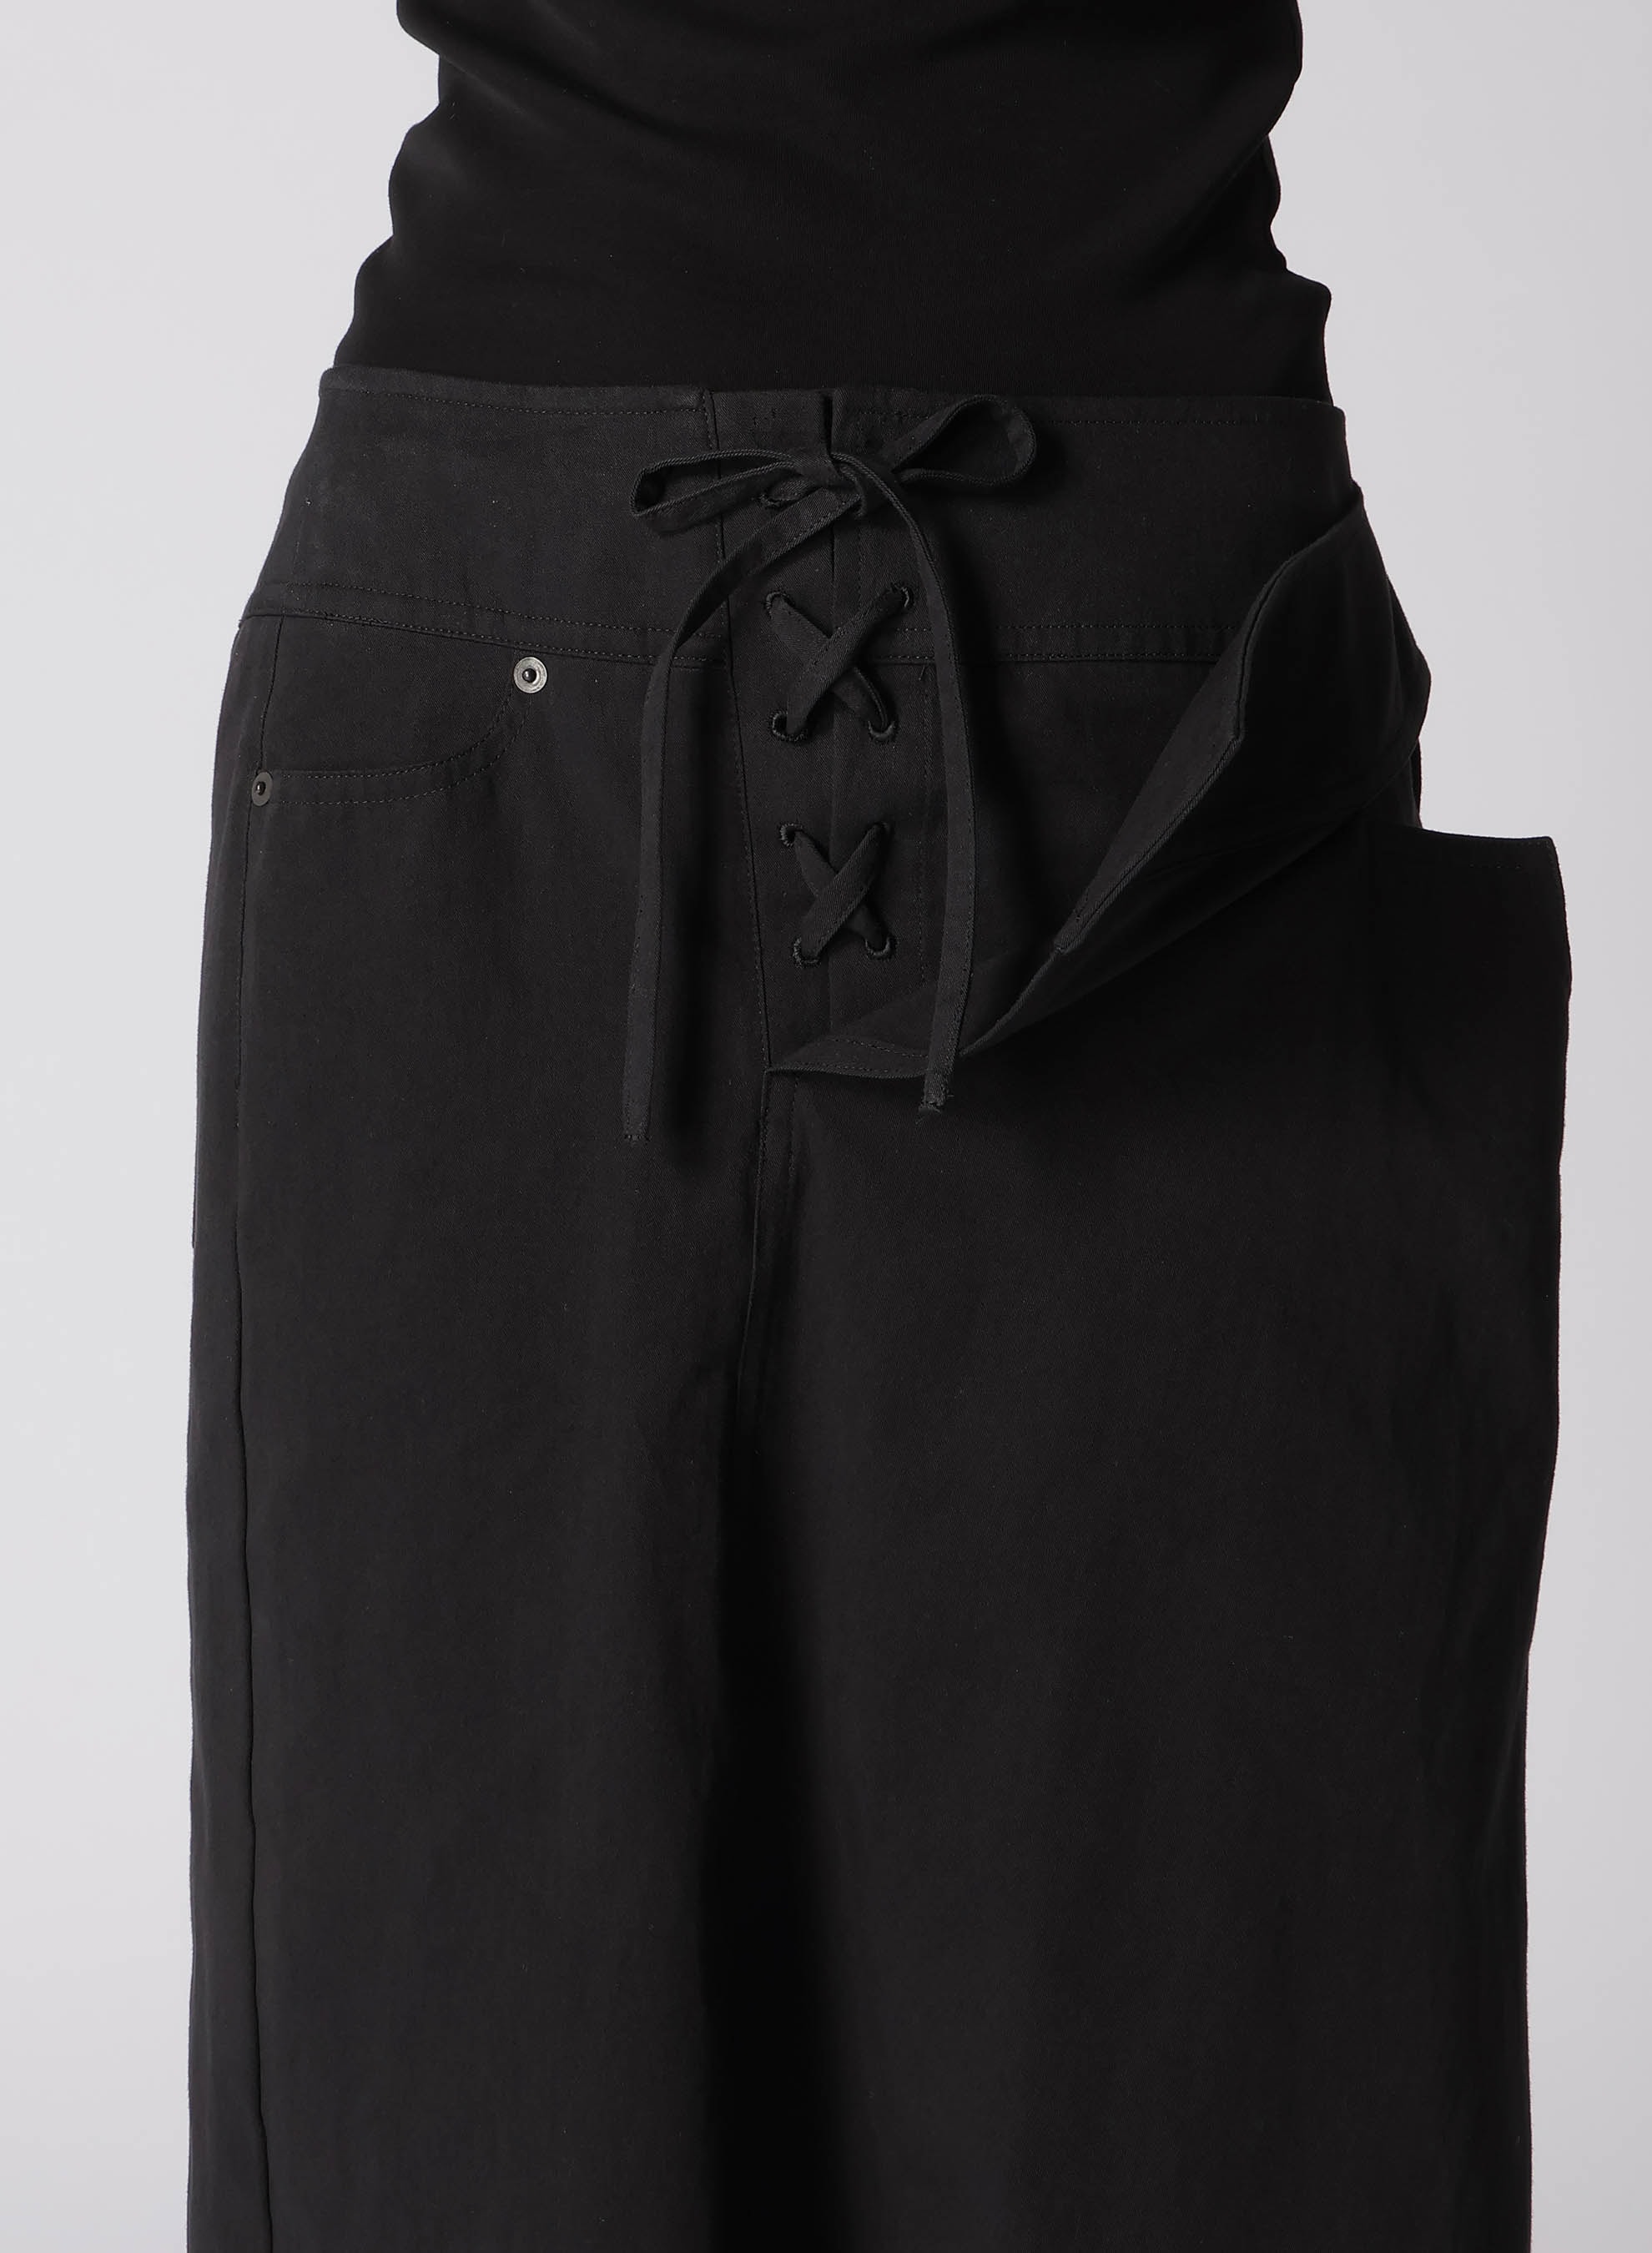 30/-COTTON TWILL LACE UP DETAIL SLIM FIT SKIRT